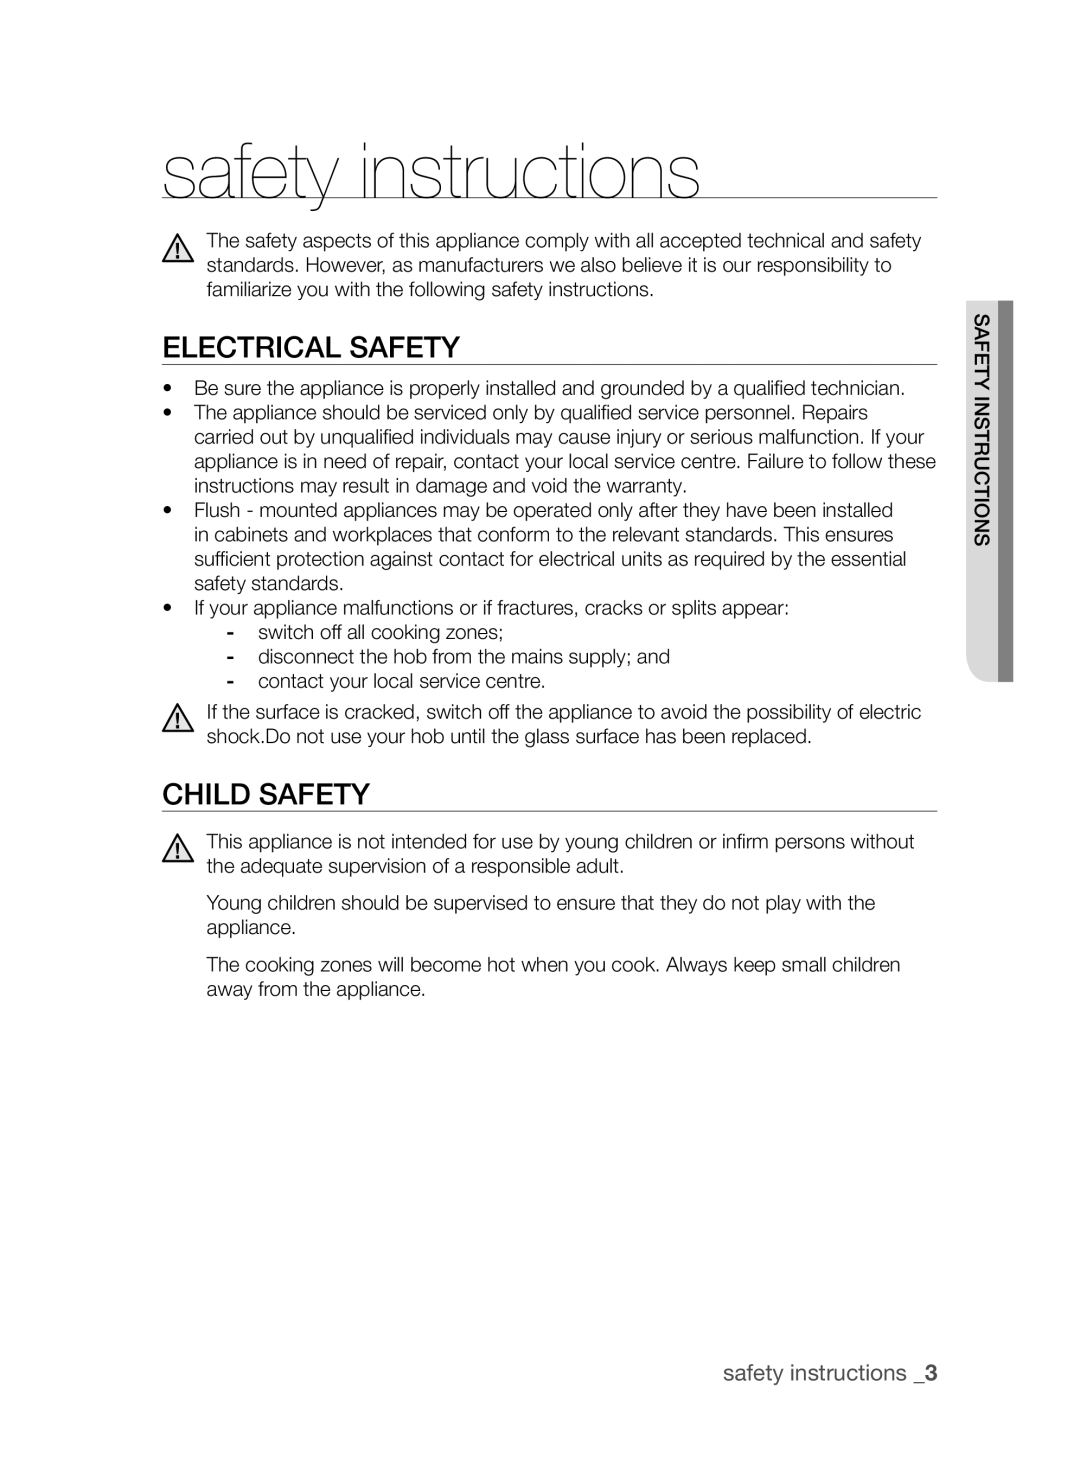 Samsung CTI613EH, CTN364D001 user manual safety instructions, Electrical safety, Child safety 